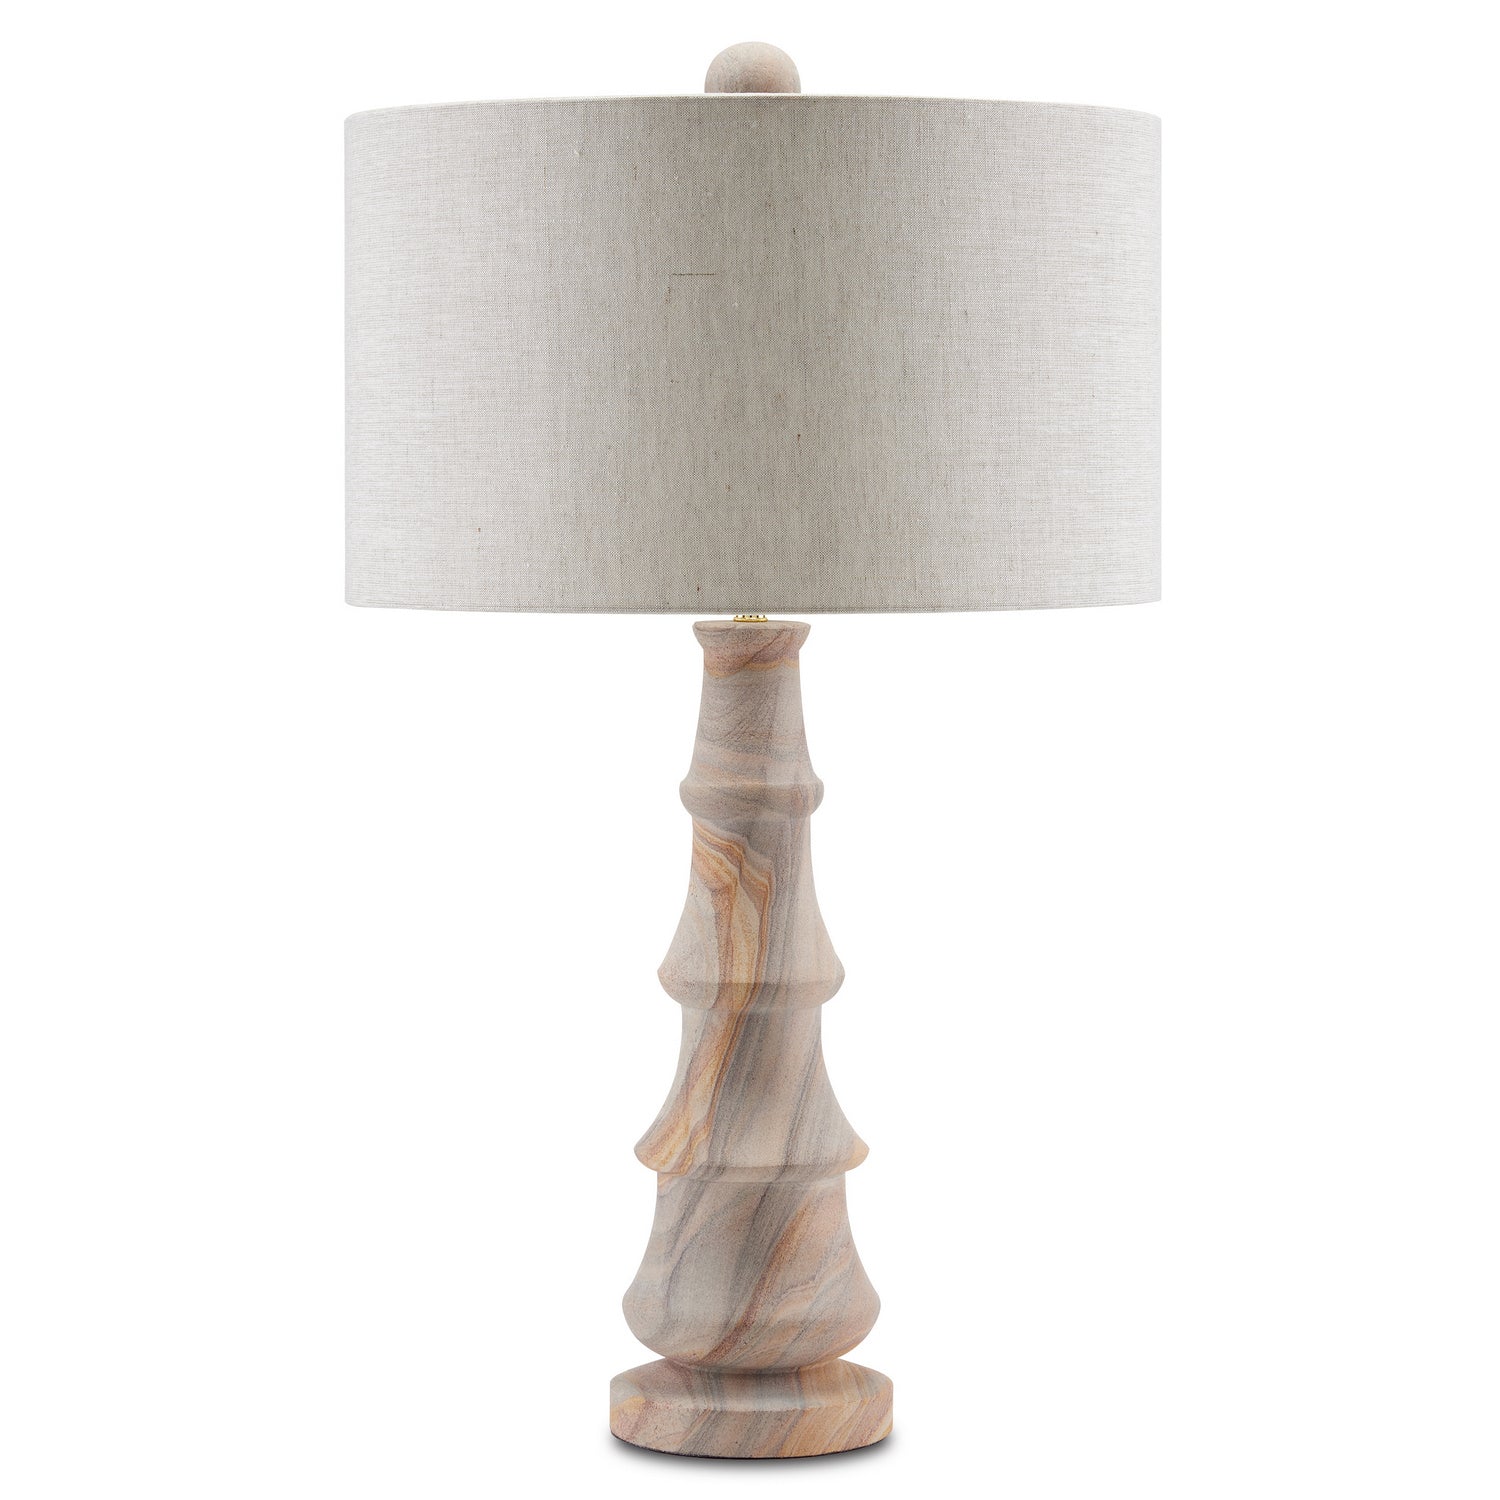 One Light Table Lamp from the Petra collection in Natural/Multi-Color finish